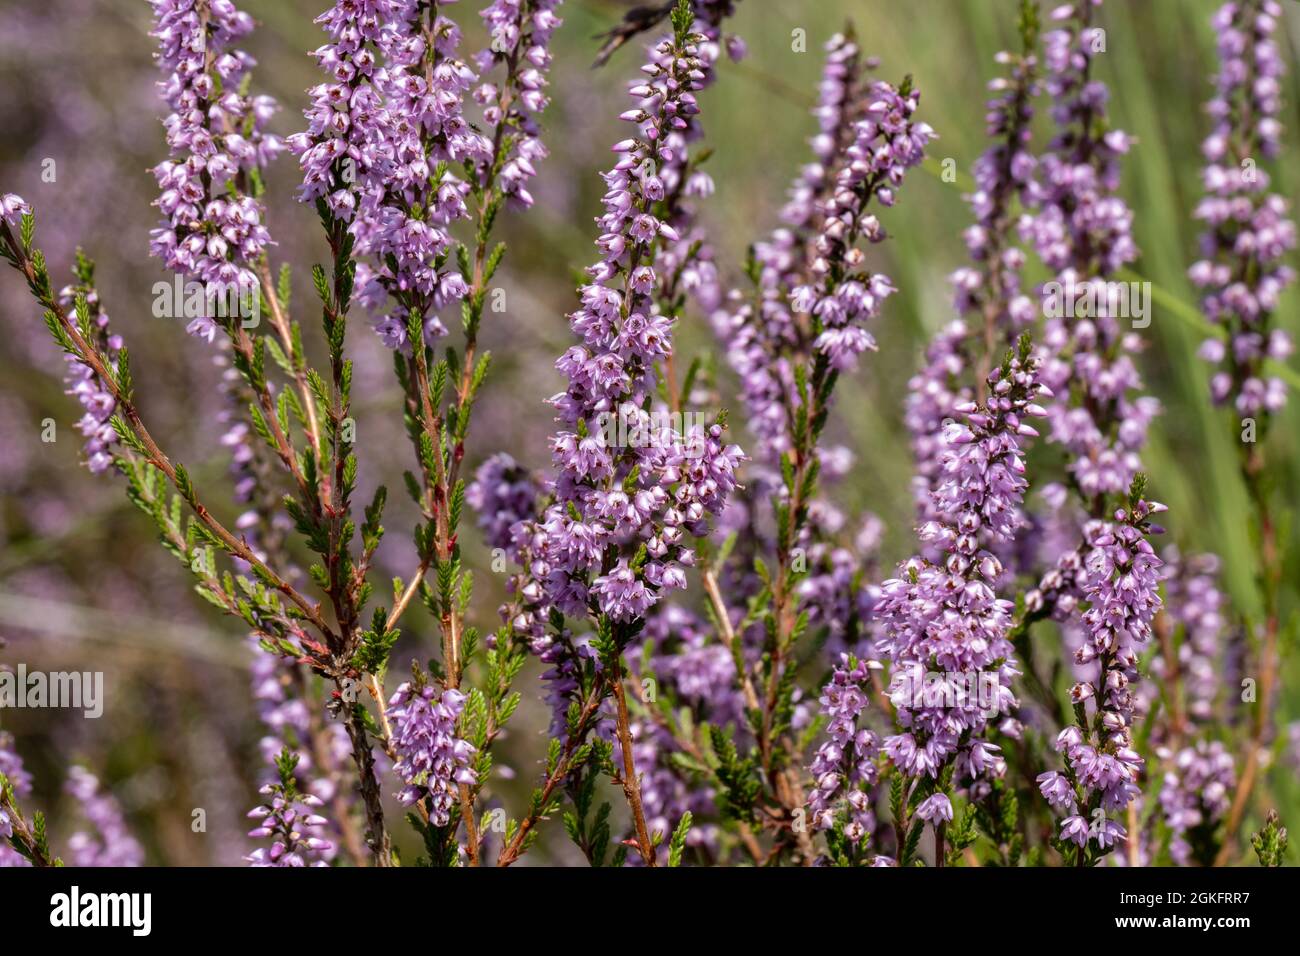 Purple blooming heath in natural setting Stock Photo